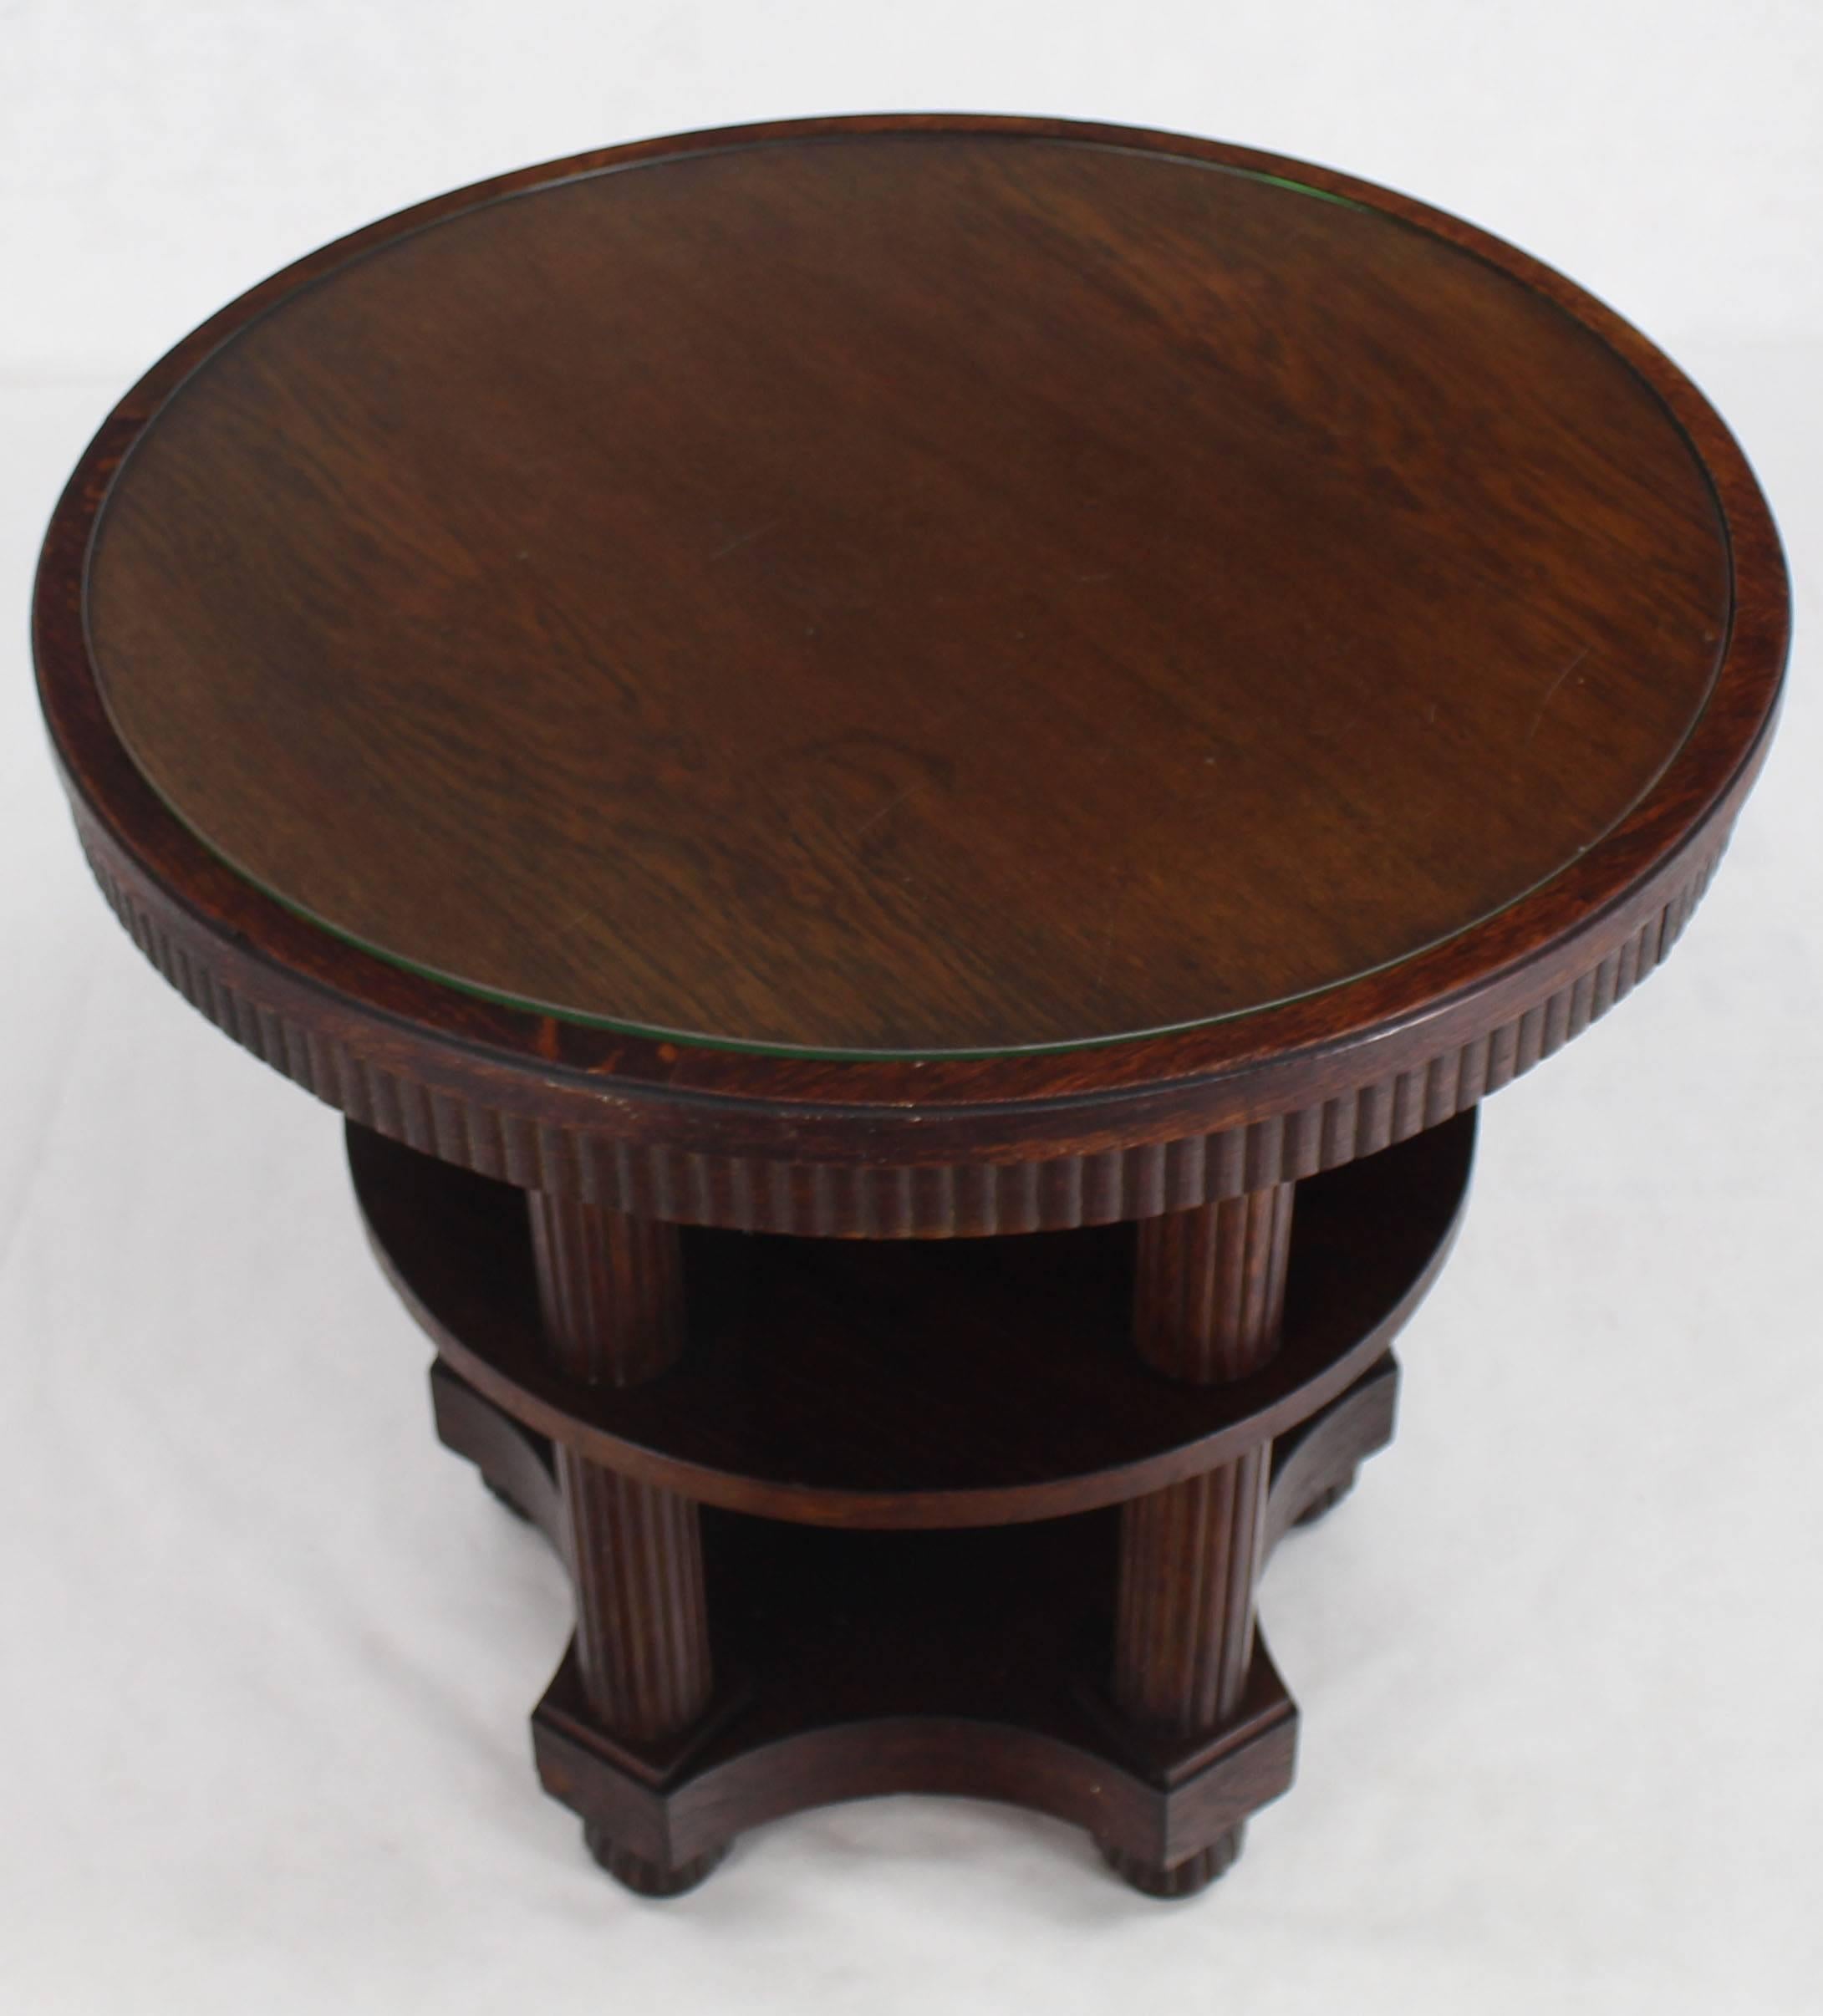 Fluted Legs Round Center Pedestal Gueridon Table Art Deco Arts and Crafts Oak  In Good Condition For Sale In Rockaway, NJ